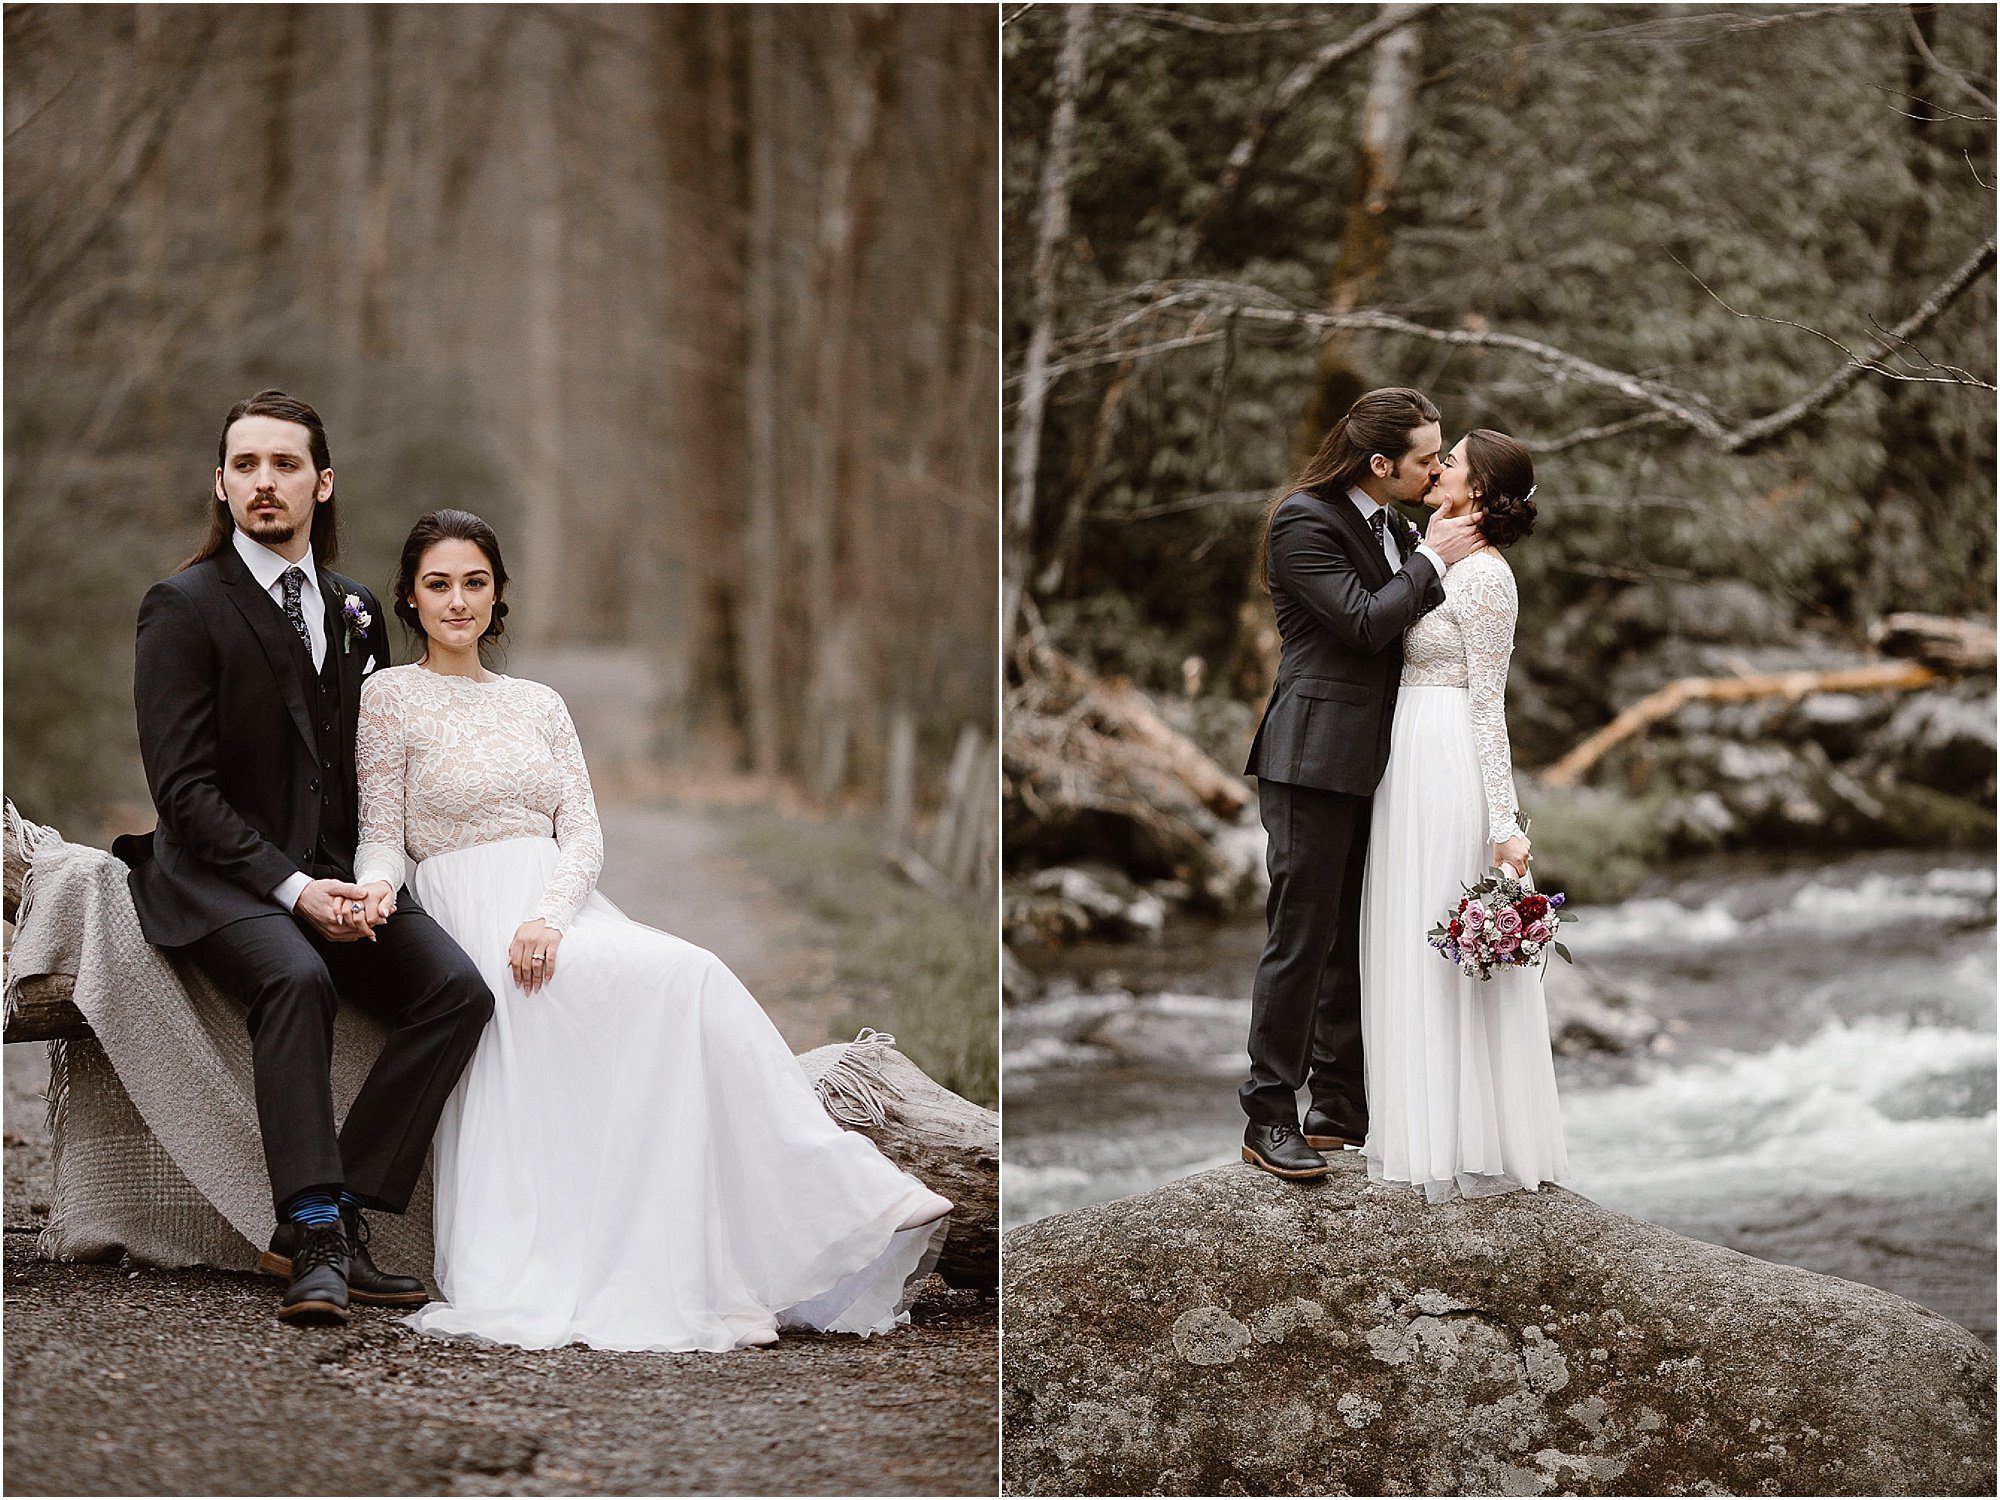 Couple photos on river at elopement in Smokies